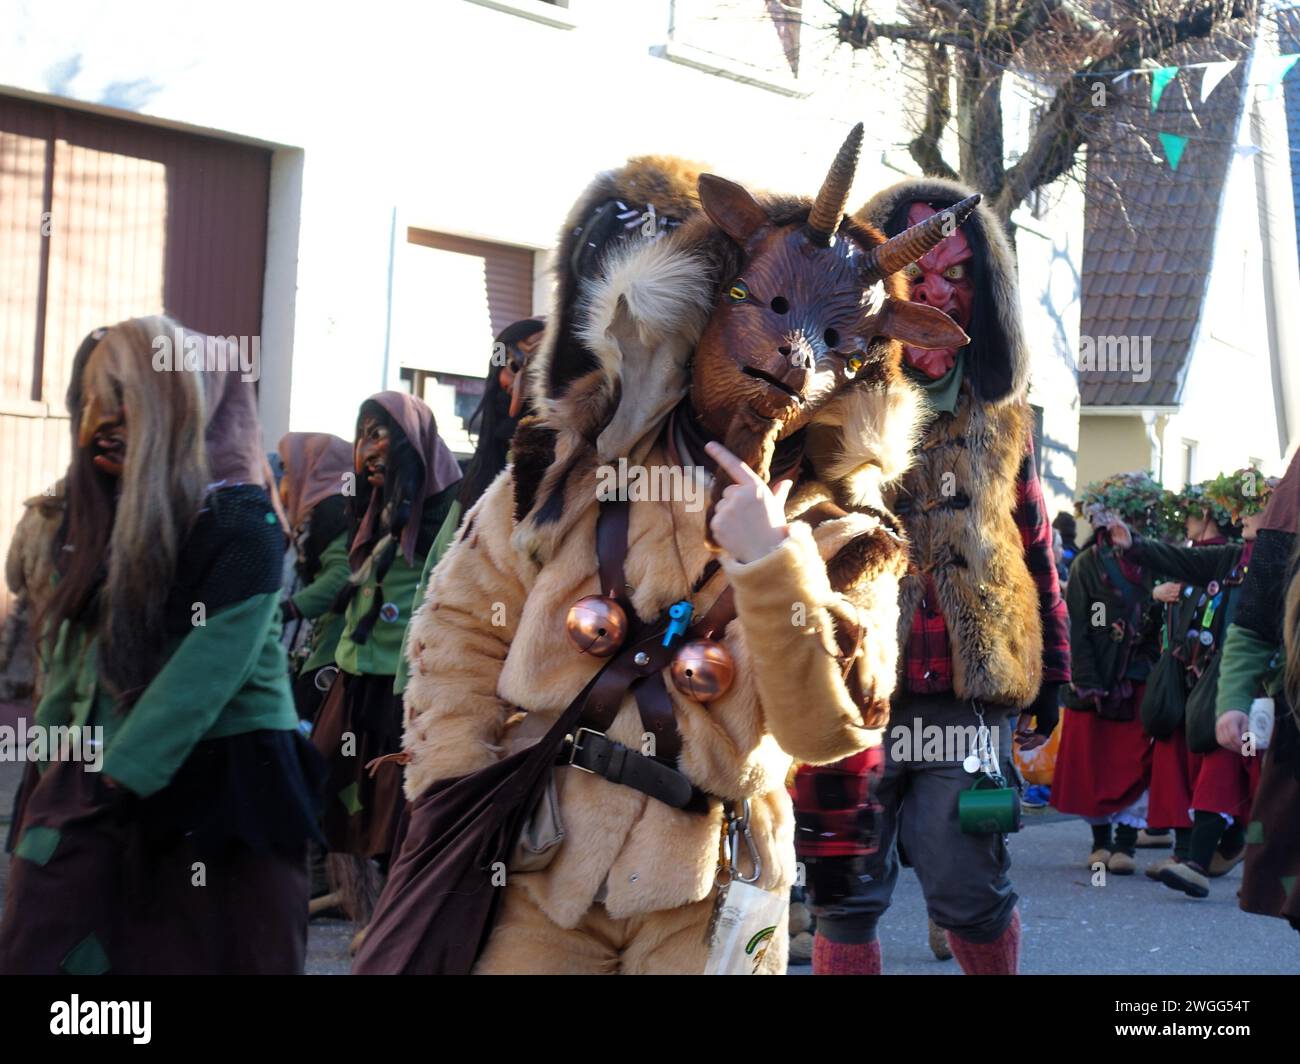 The people dressed in costumes during the Swabian-Alemannic Fastnacht carnival in Kirrlach. Stock Photo